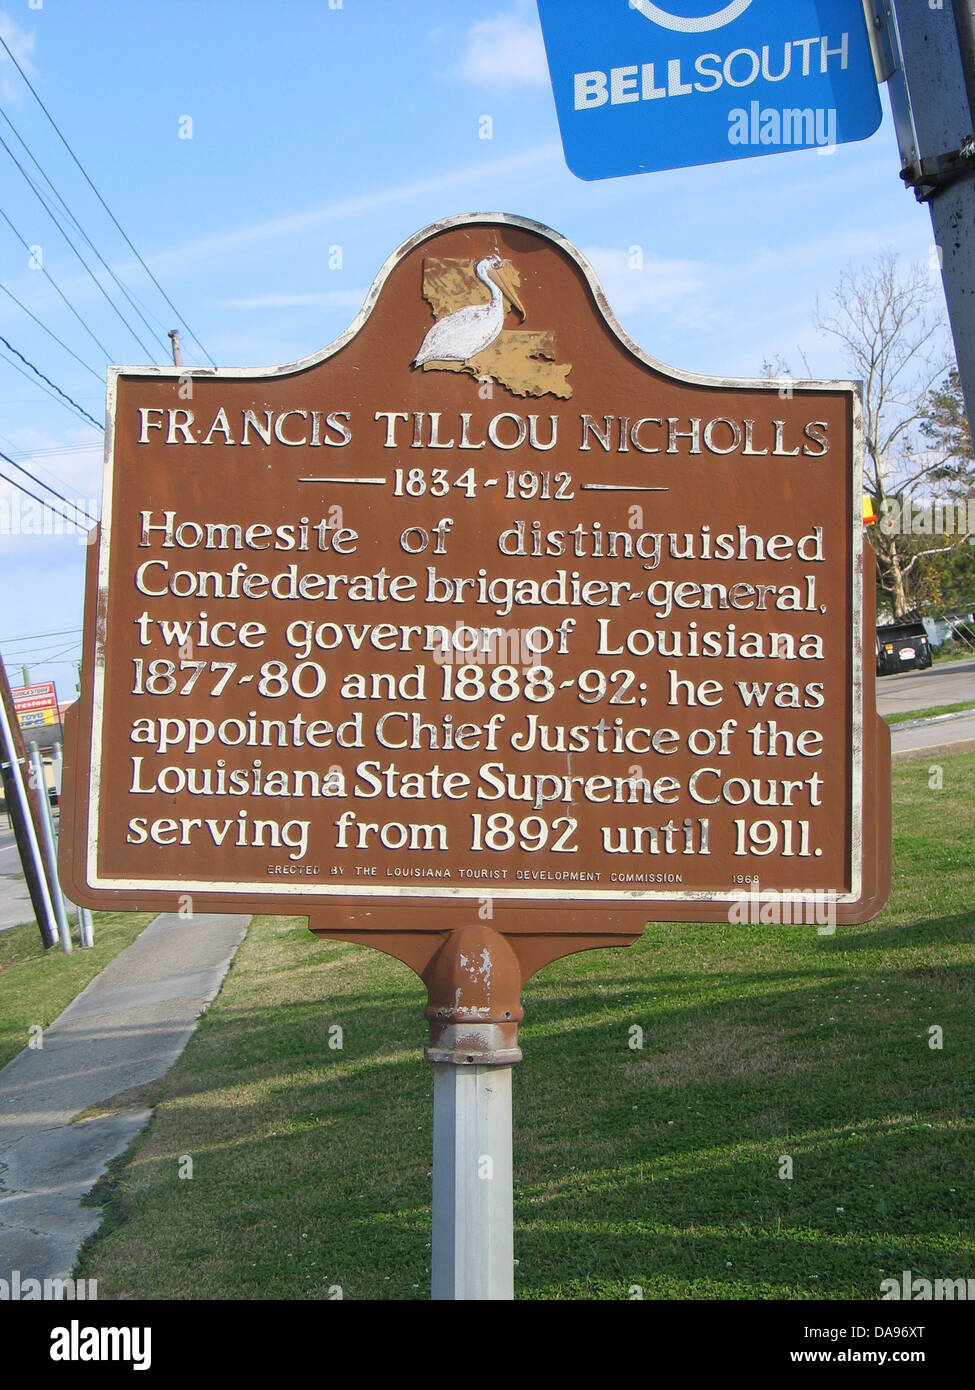 FRANCIS TILLOU NICHOLLS (1834-1912) Homesite of distinguished Confederate brigadier-general, twice governor of Louisiana 1877-80 and 1888-92; he was appointed Chief Justice of the Louisiana State Supreme Court serving from 1892 until 1911. Erected by the Louisiana Tourist Development Commission, 1968 Stock Photo